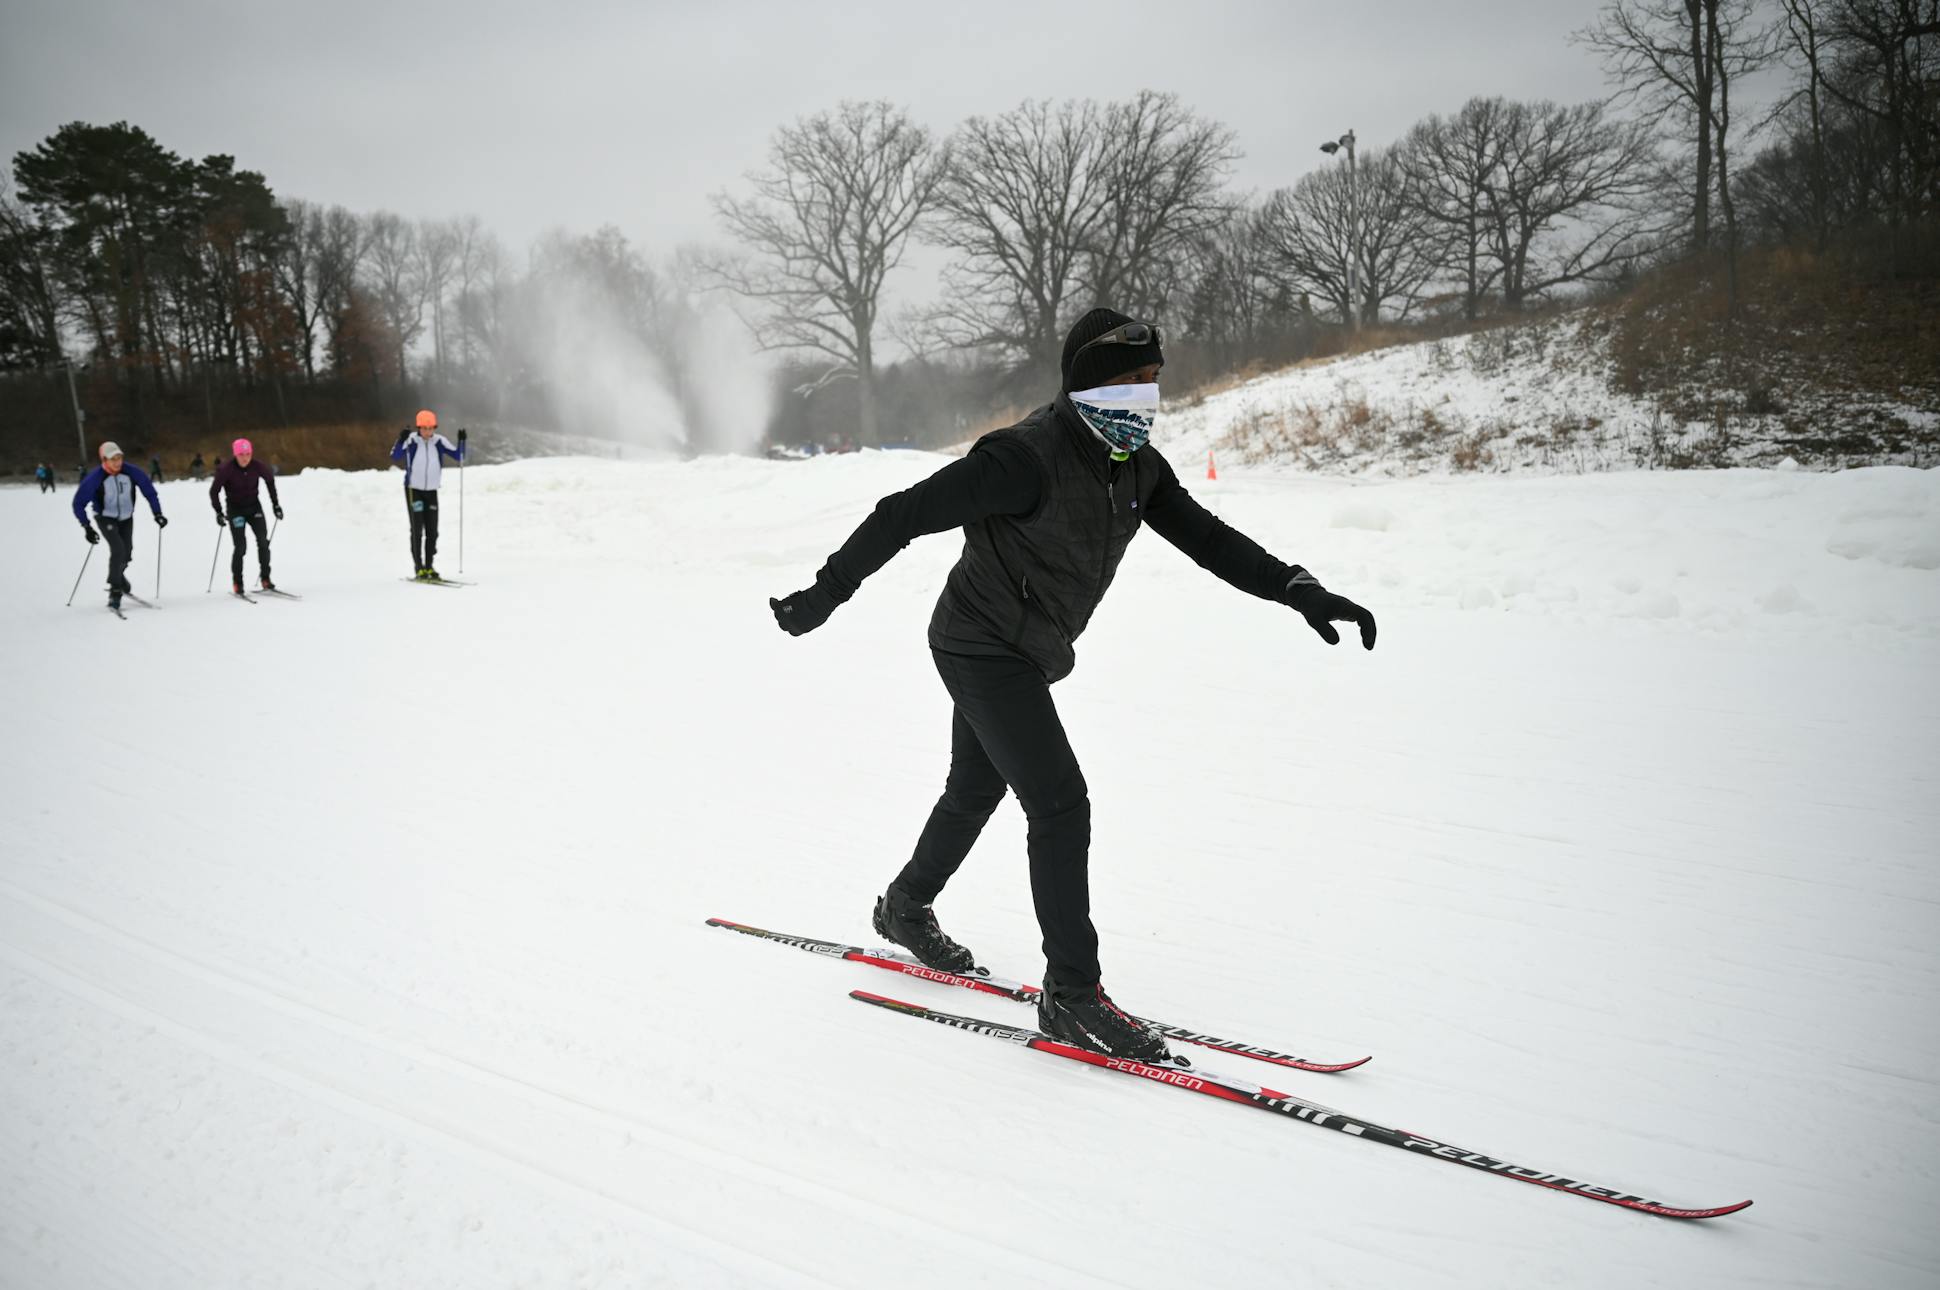 Taylor cross-country skied without poles while teaching a group of aspiring instructors at Theodore Wirth Park Saturday, Dec. 19, 2020.